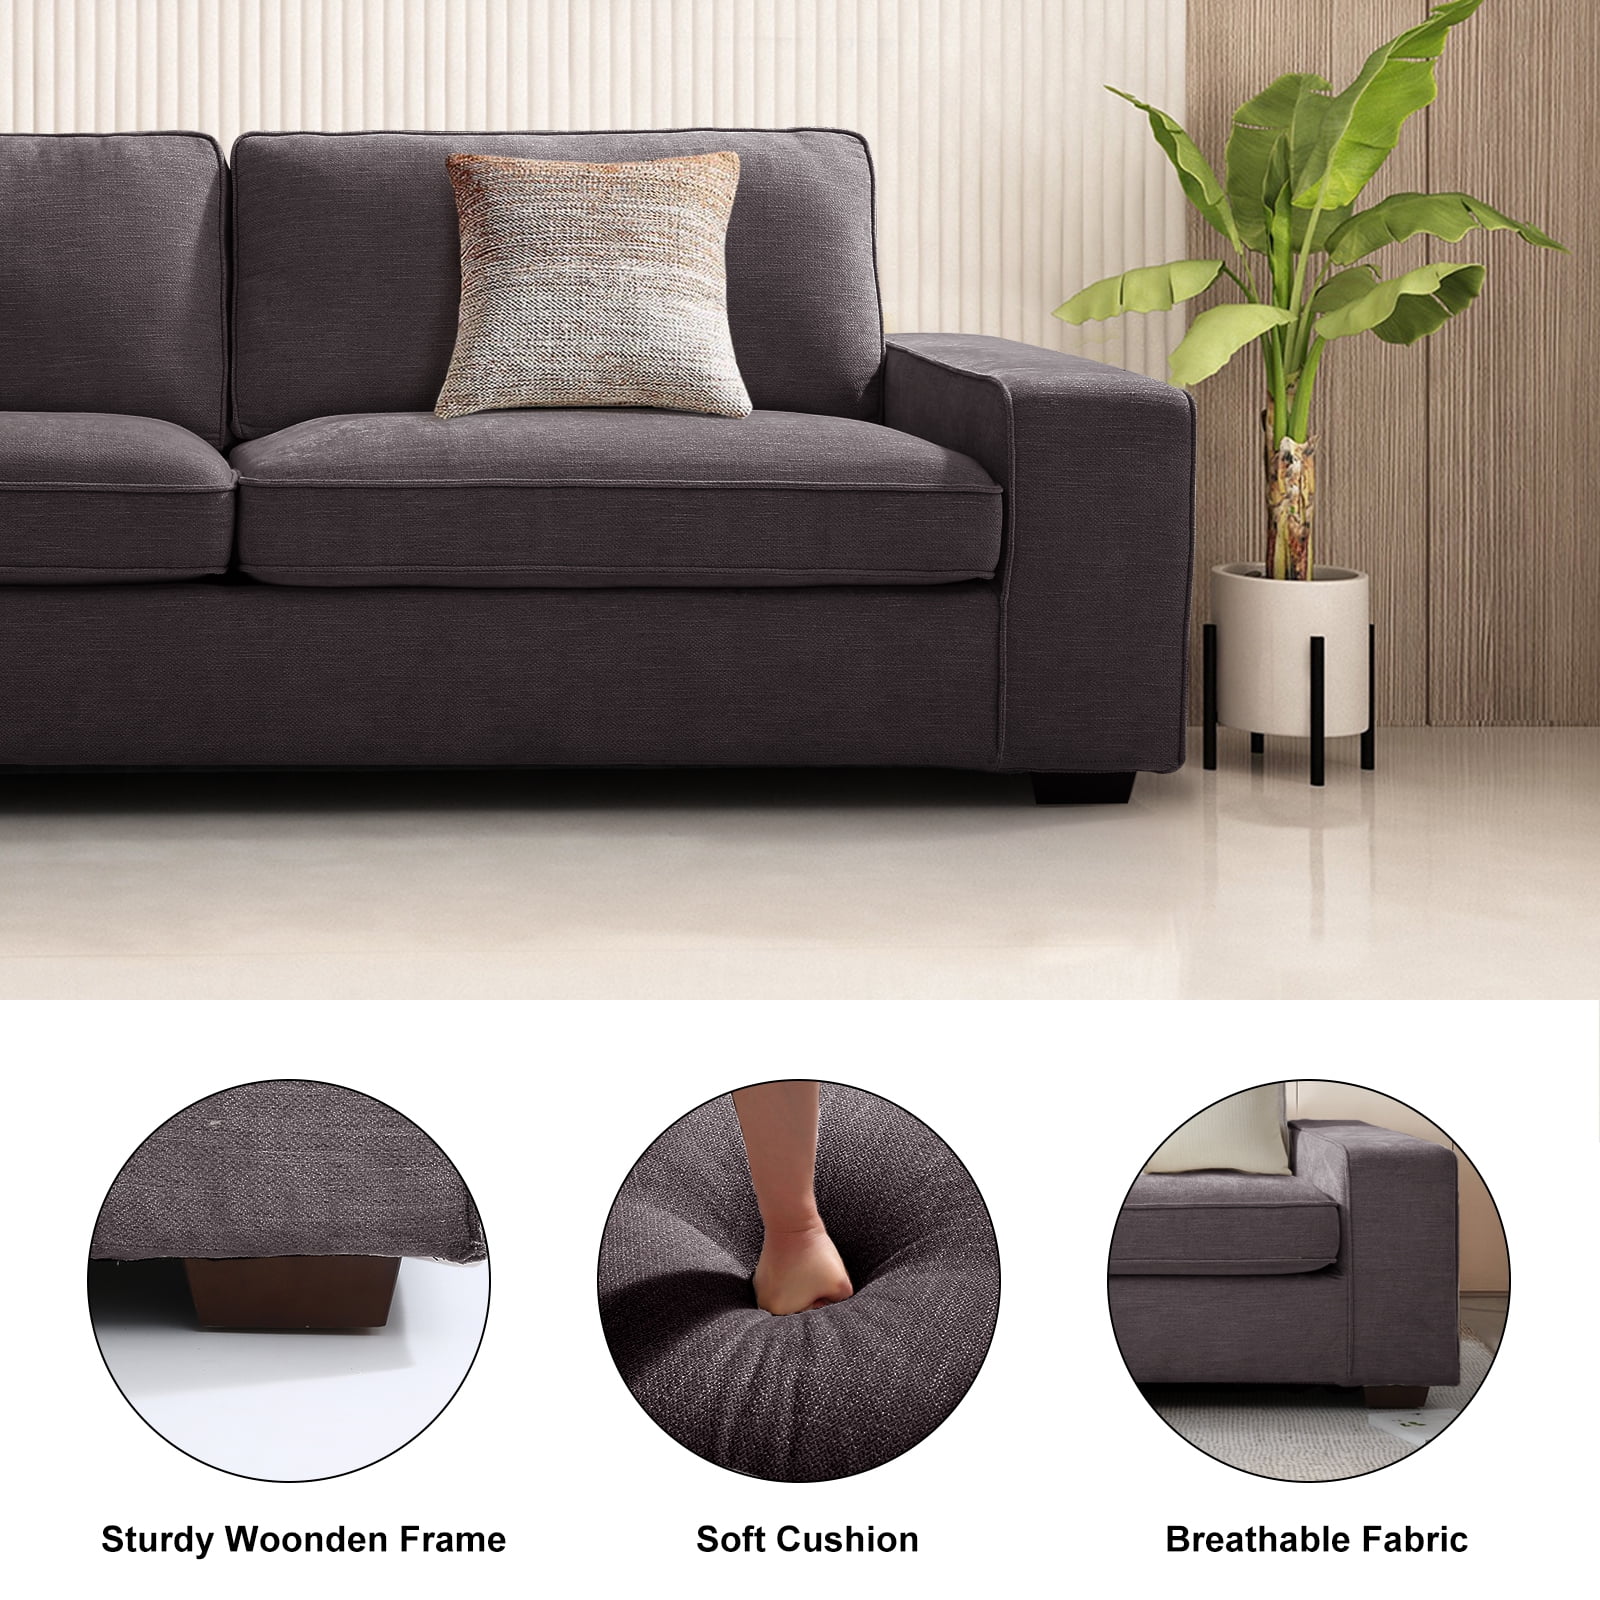 COHOME 88.58 Modern Loveseat Sofas Couches with Solid Wood ,Living Room  Furniture with Armrests, Sofa for Small Spaces, Removable Back Cushion,  Beige Chenille 